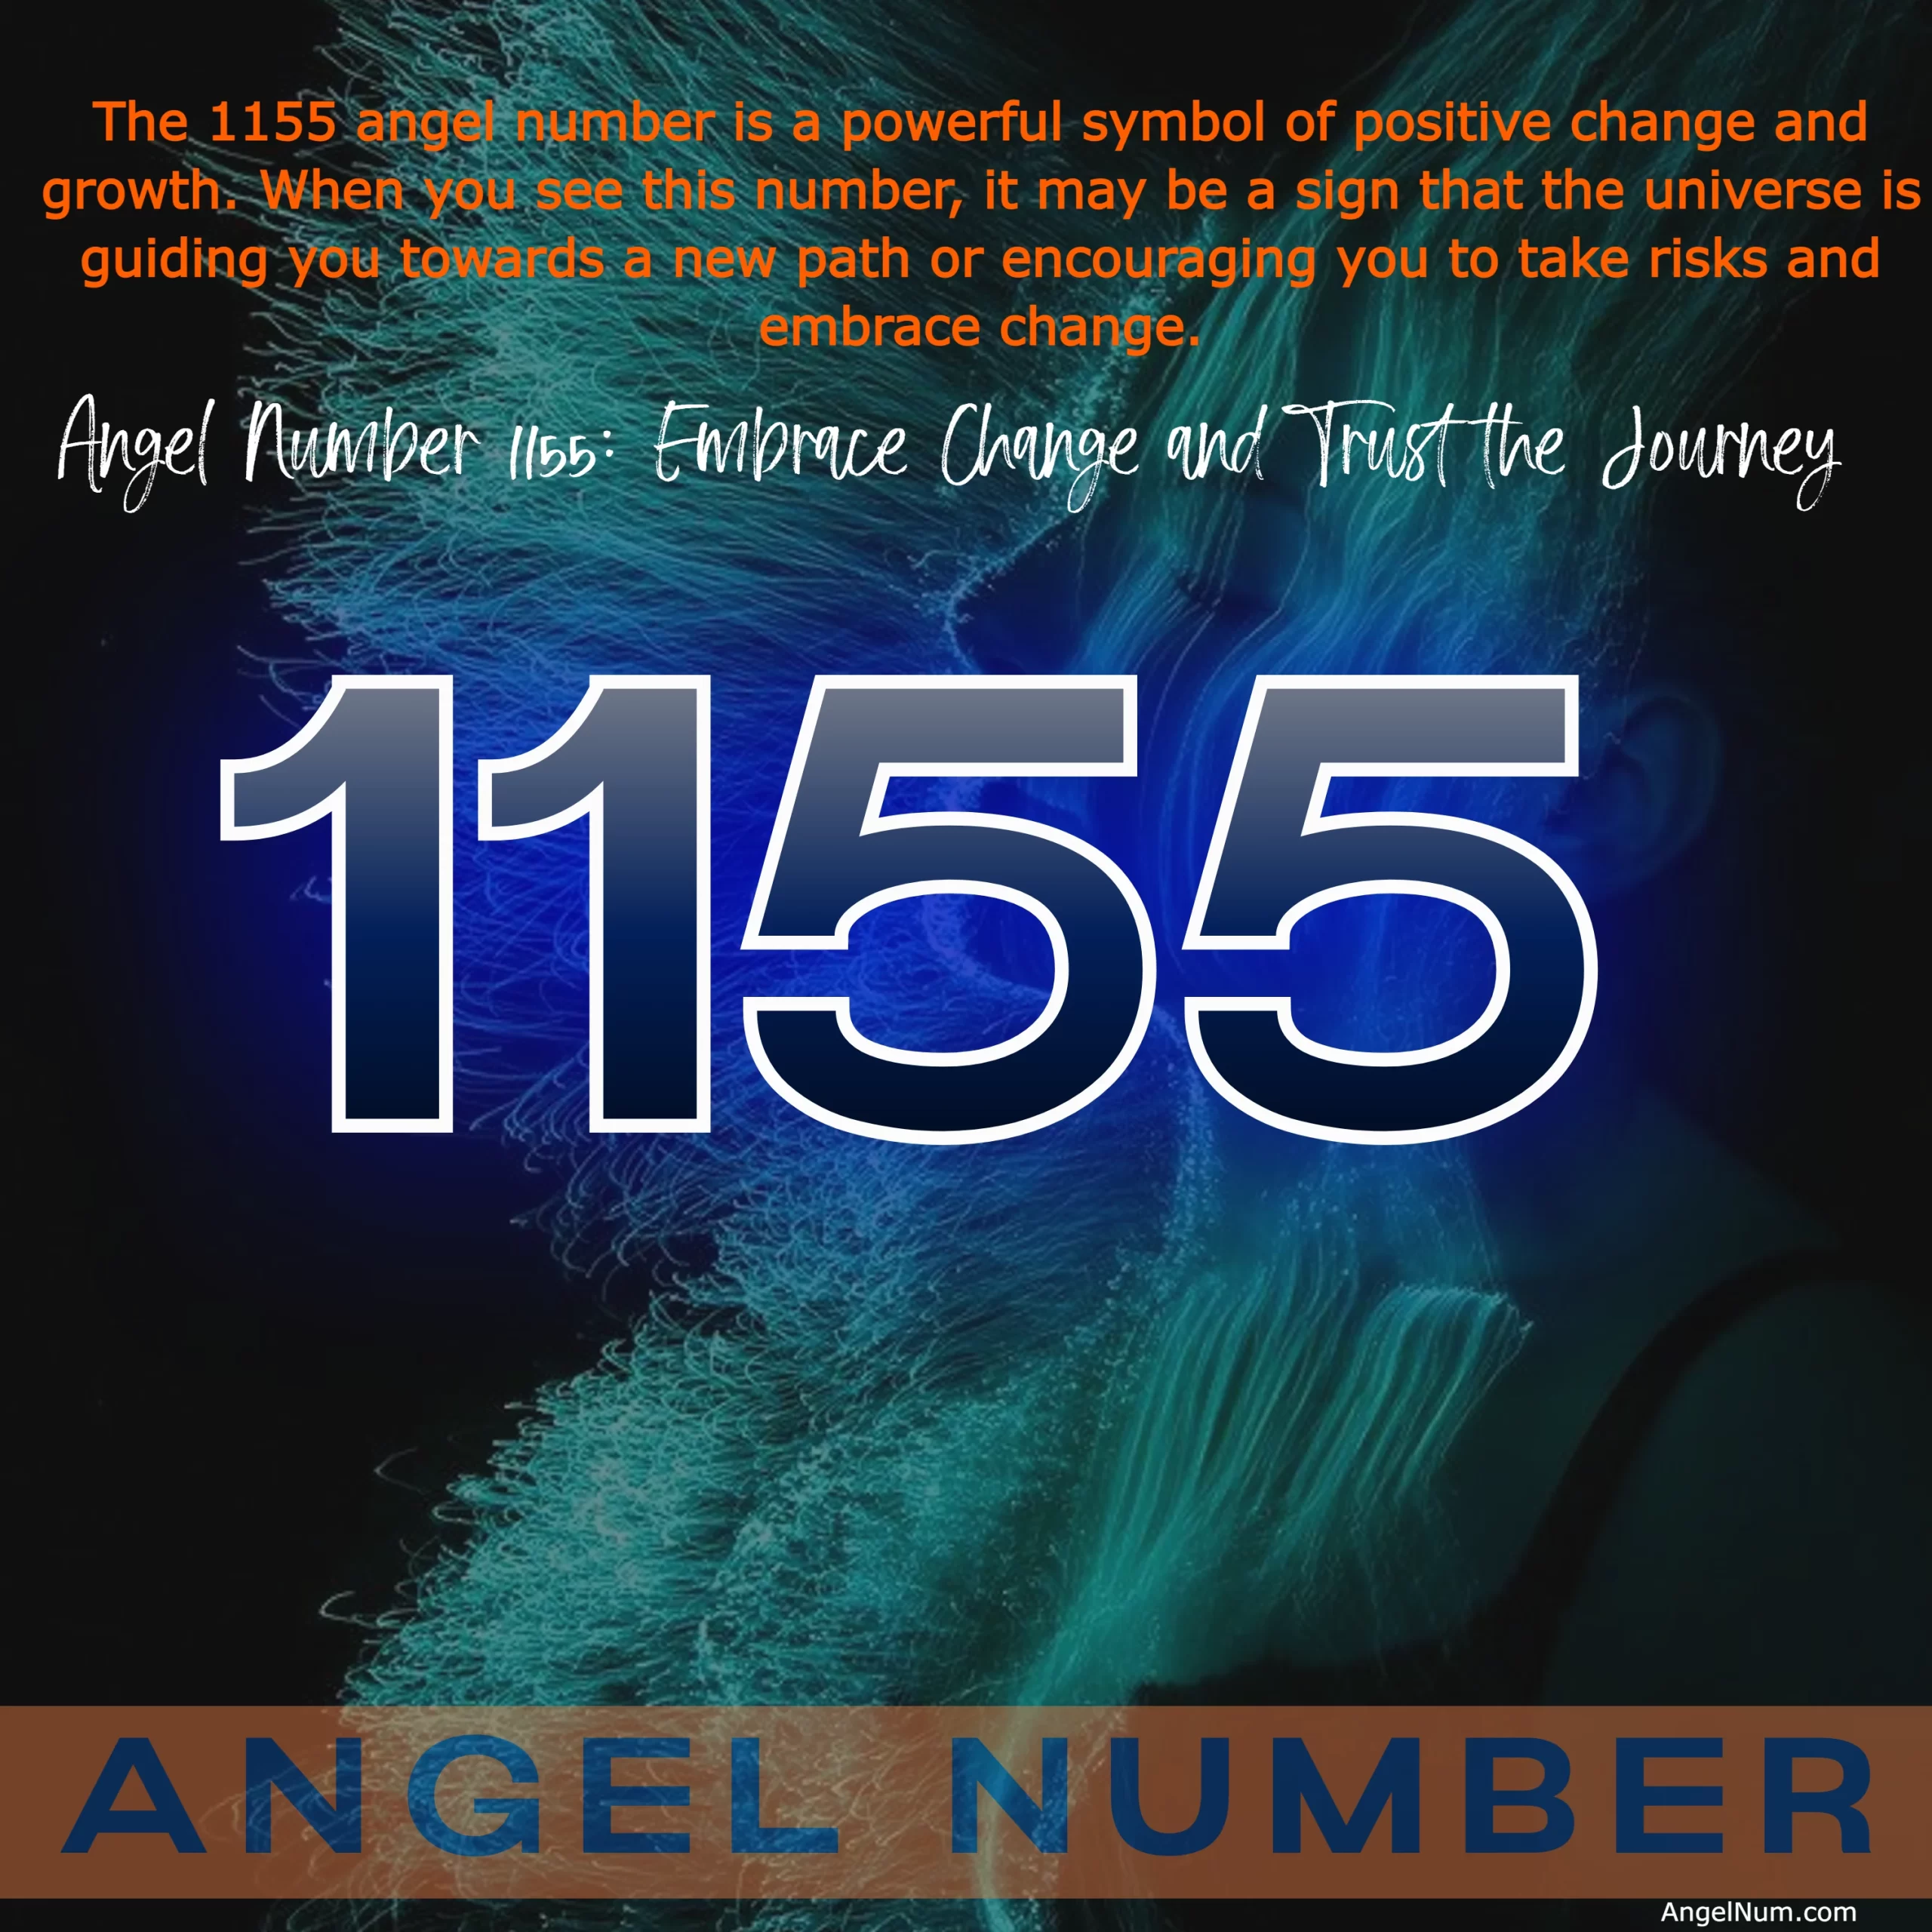 Angel Number 1155: Embrace Change and Trust the Journey